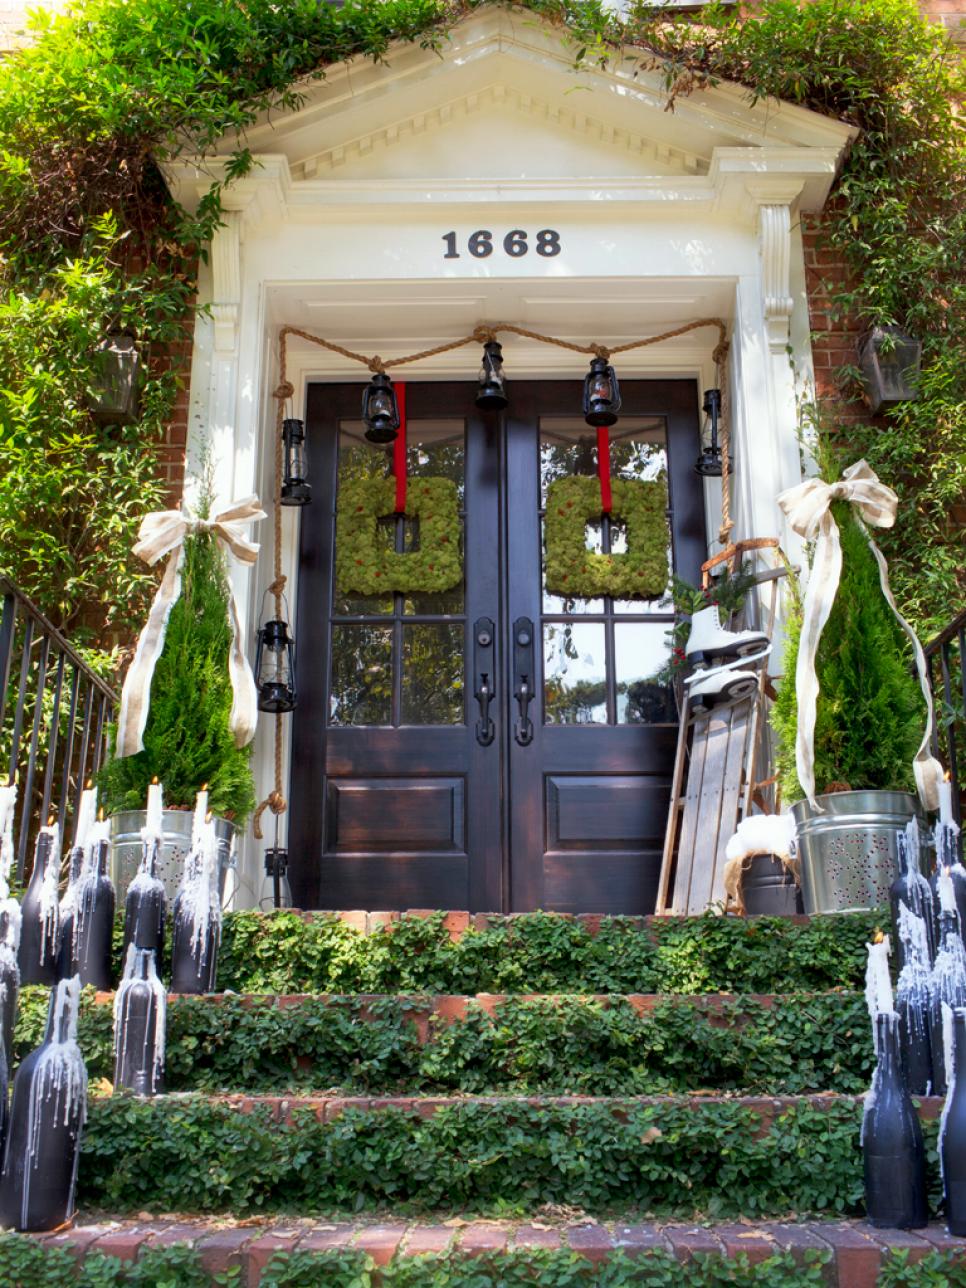 19 Outdoor Christmas Decorating Ideas Hgtv in Stylish  home decorating ideas outside for Your house